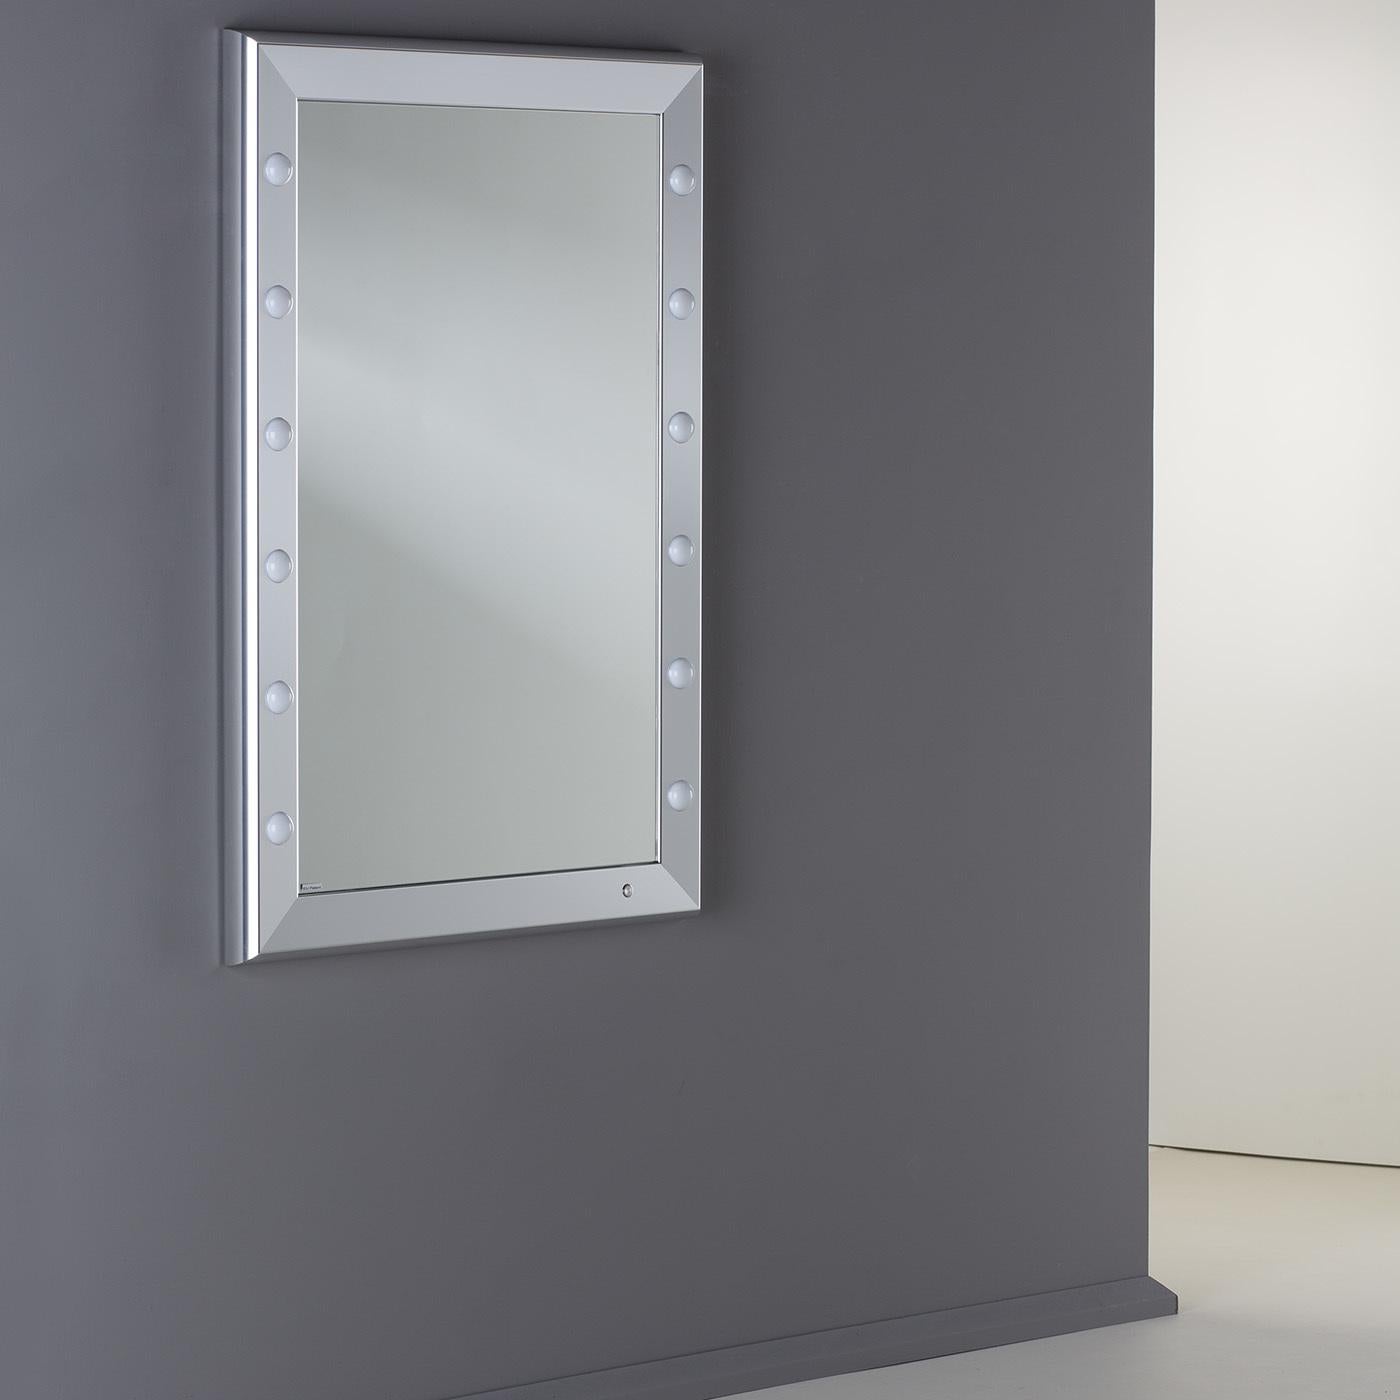 Far from being a mere decorative piece, this classic backstage-style lighted mirror is equipped with high-tech features that make it a must-have accent for a bedroom or walk-in closet. Part of the SP line, the polished silver anodized aluminum frame